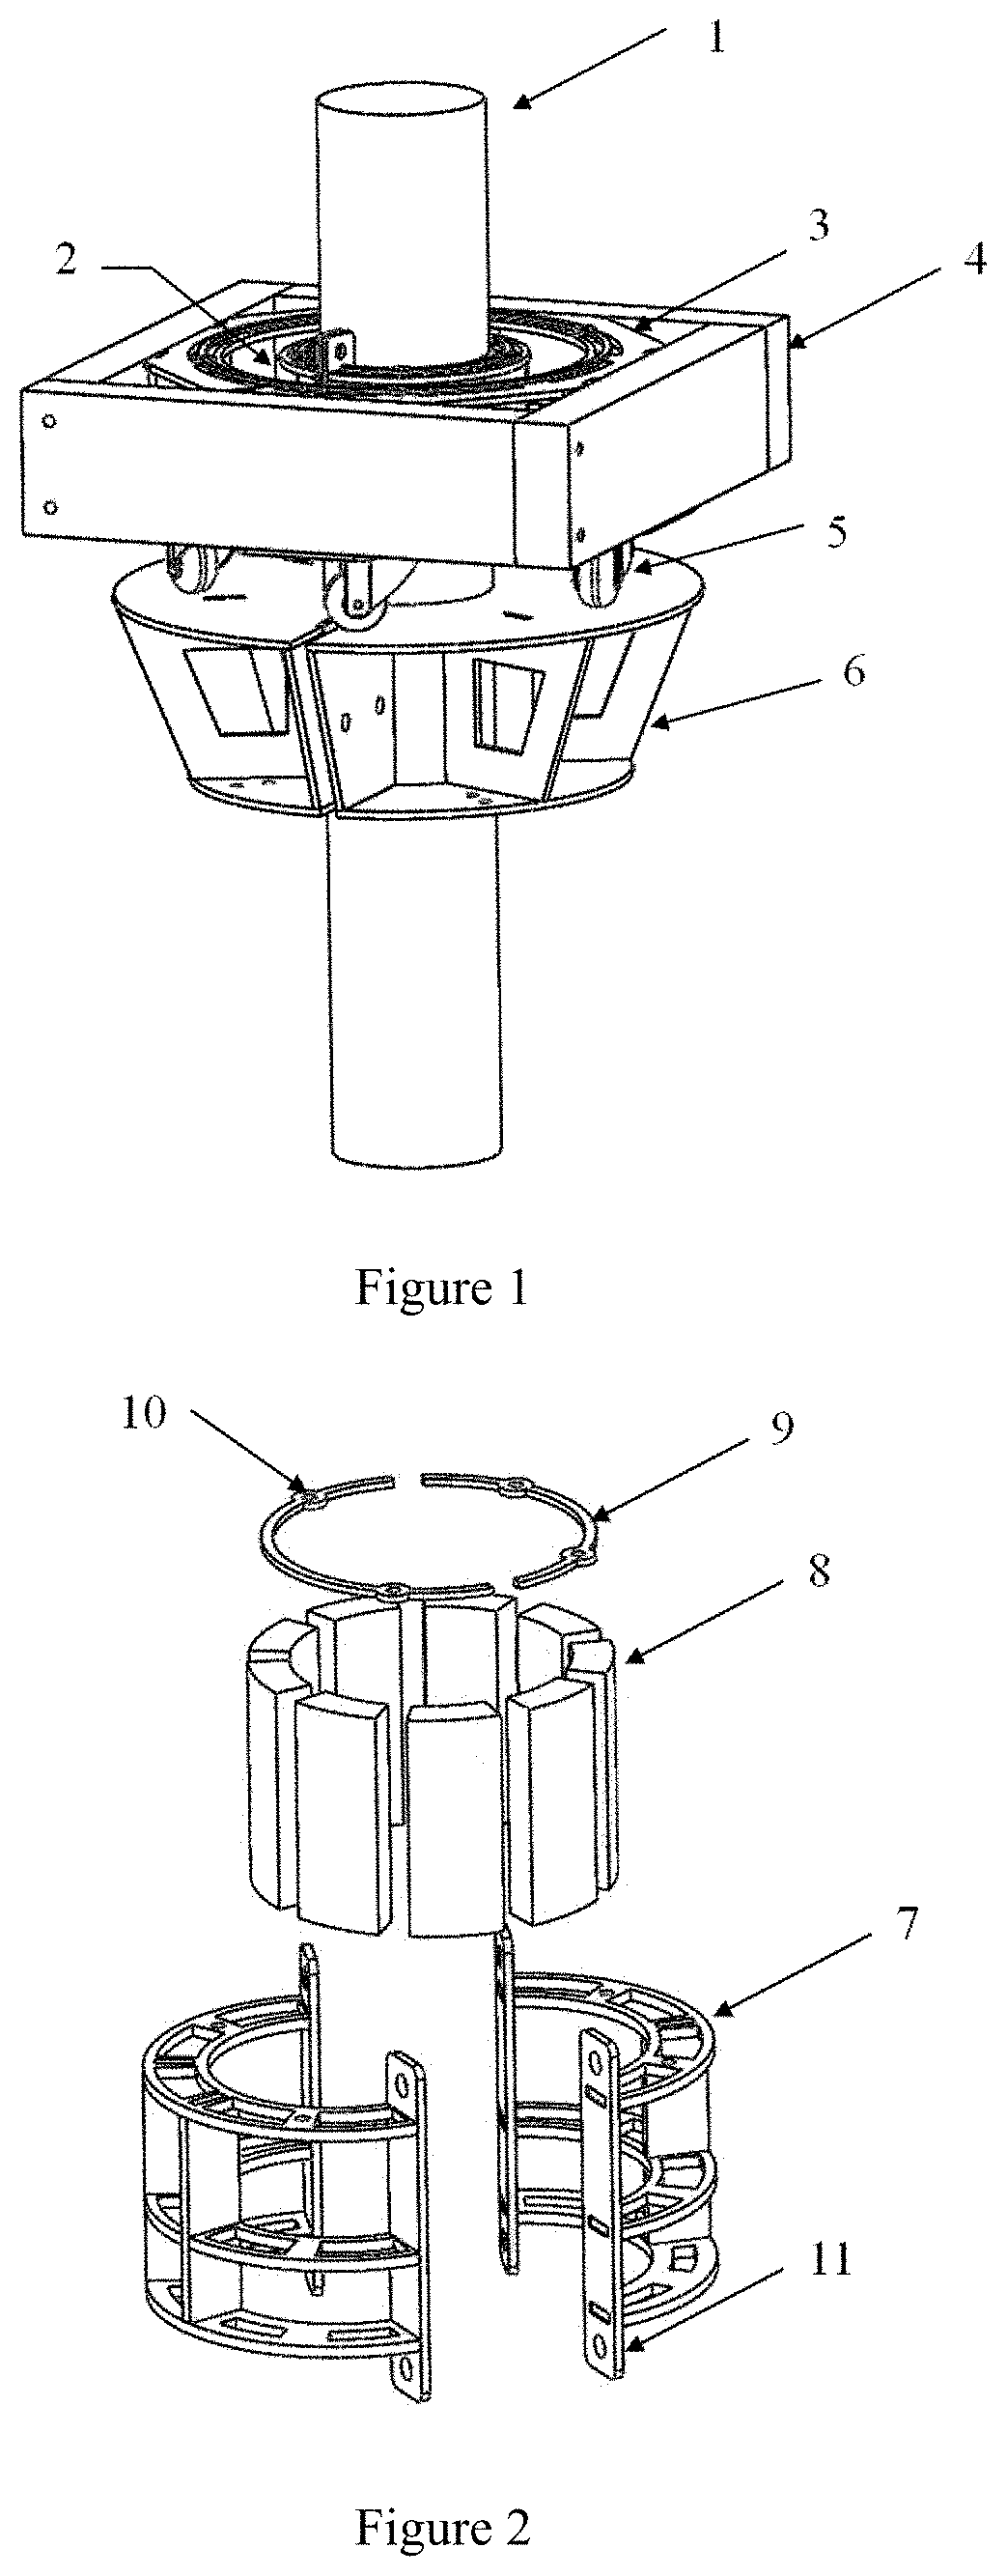 Double-ring shaped strong magnet array nonlinear dynamic vibration absorber for vibration mitigation of suspender cables and design method thereof